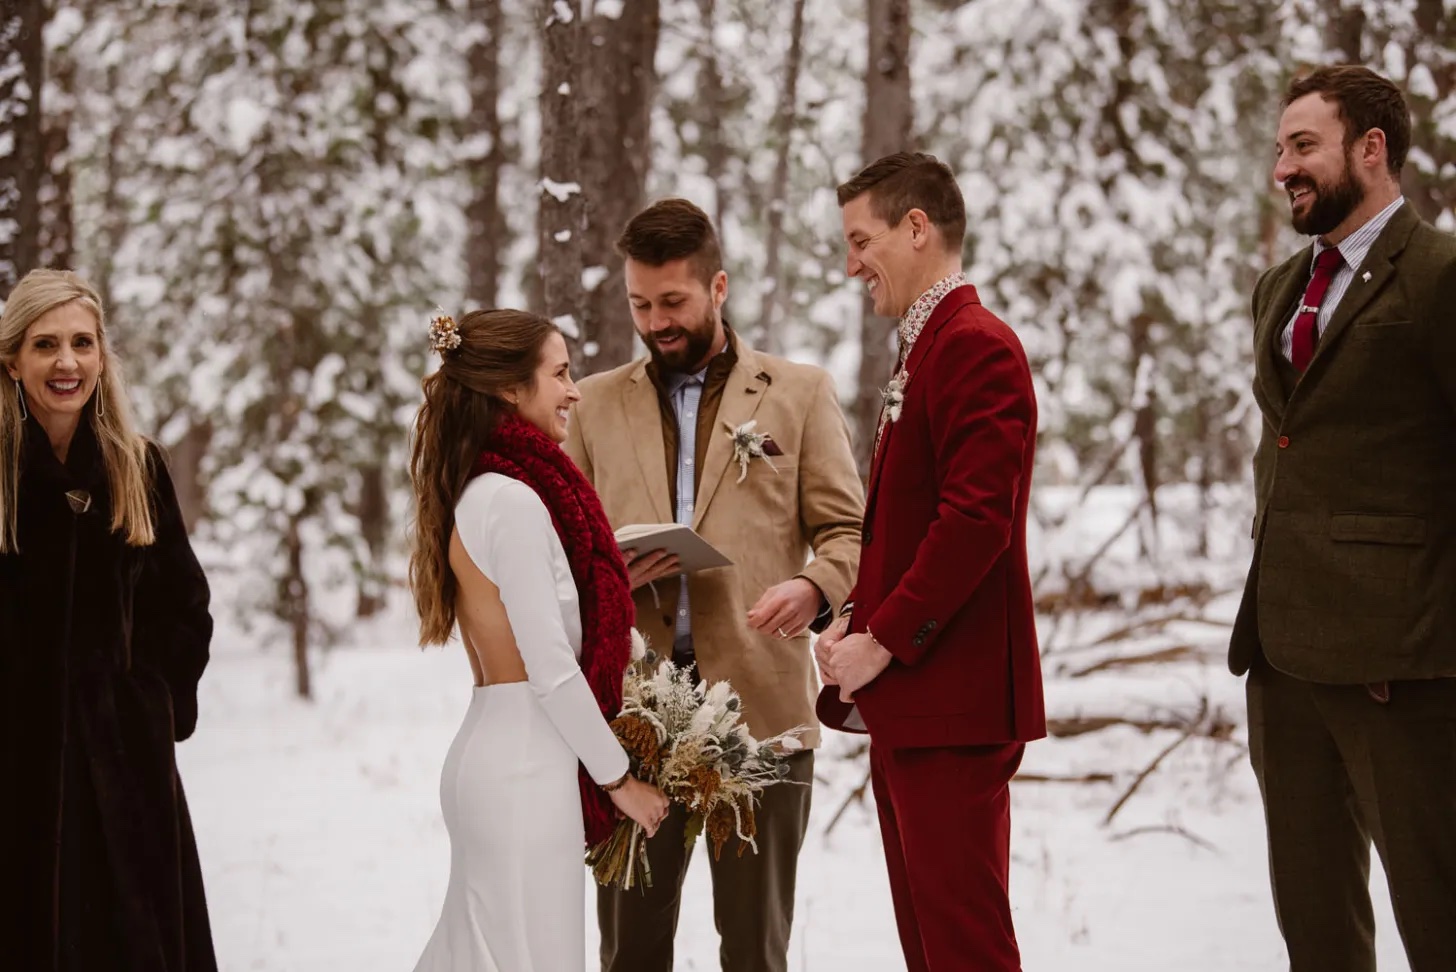 Couple with holiday theme getting married in the snowy forest. 5 Rules when it comes to Planning a Wedding close to the Holidays